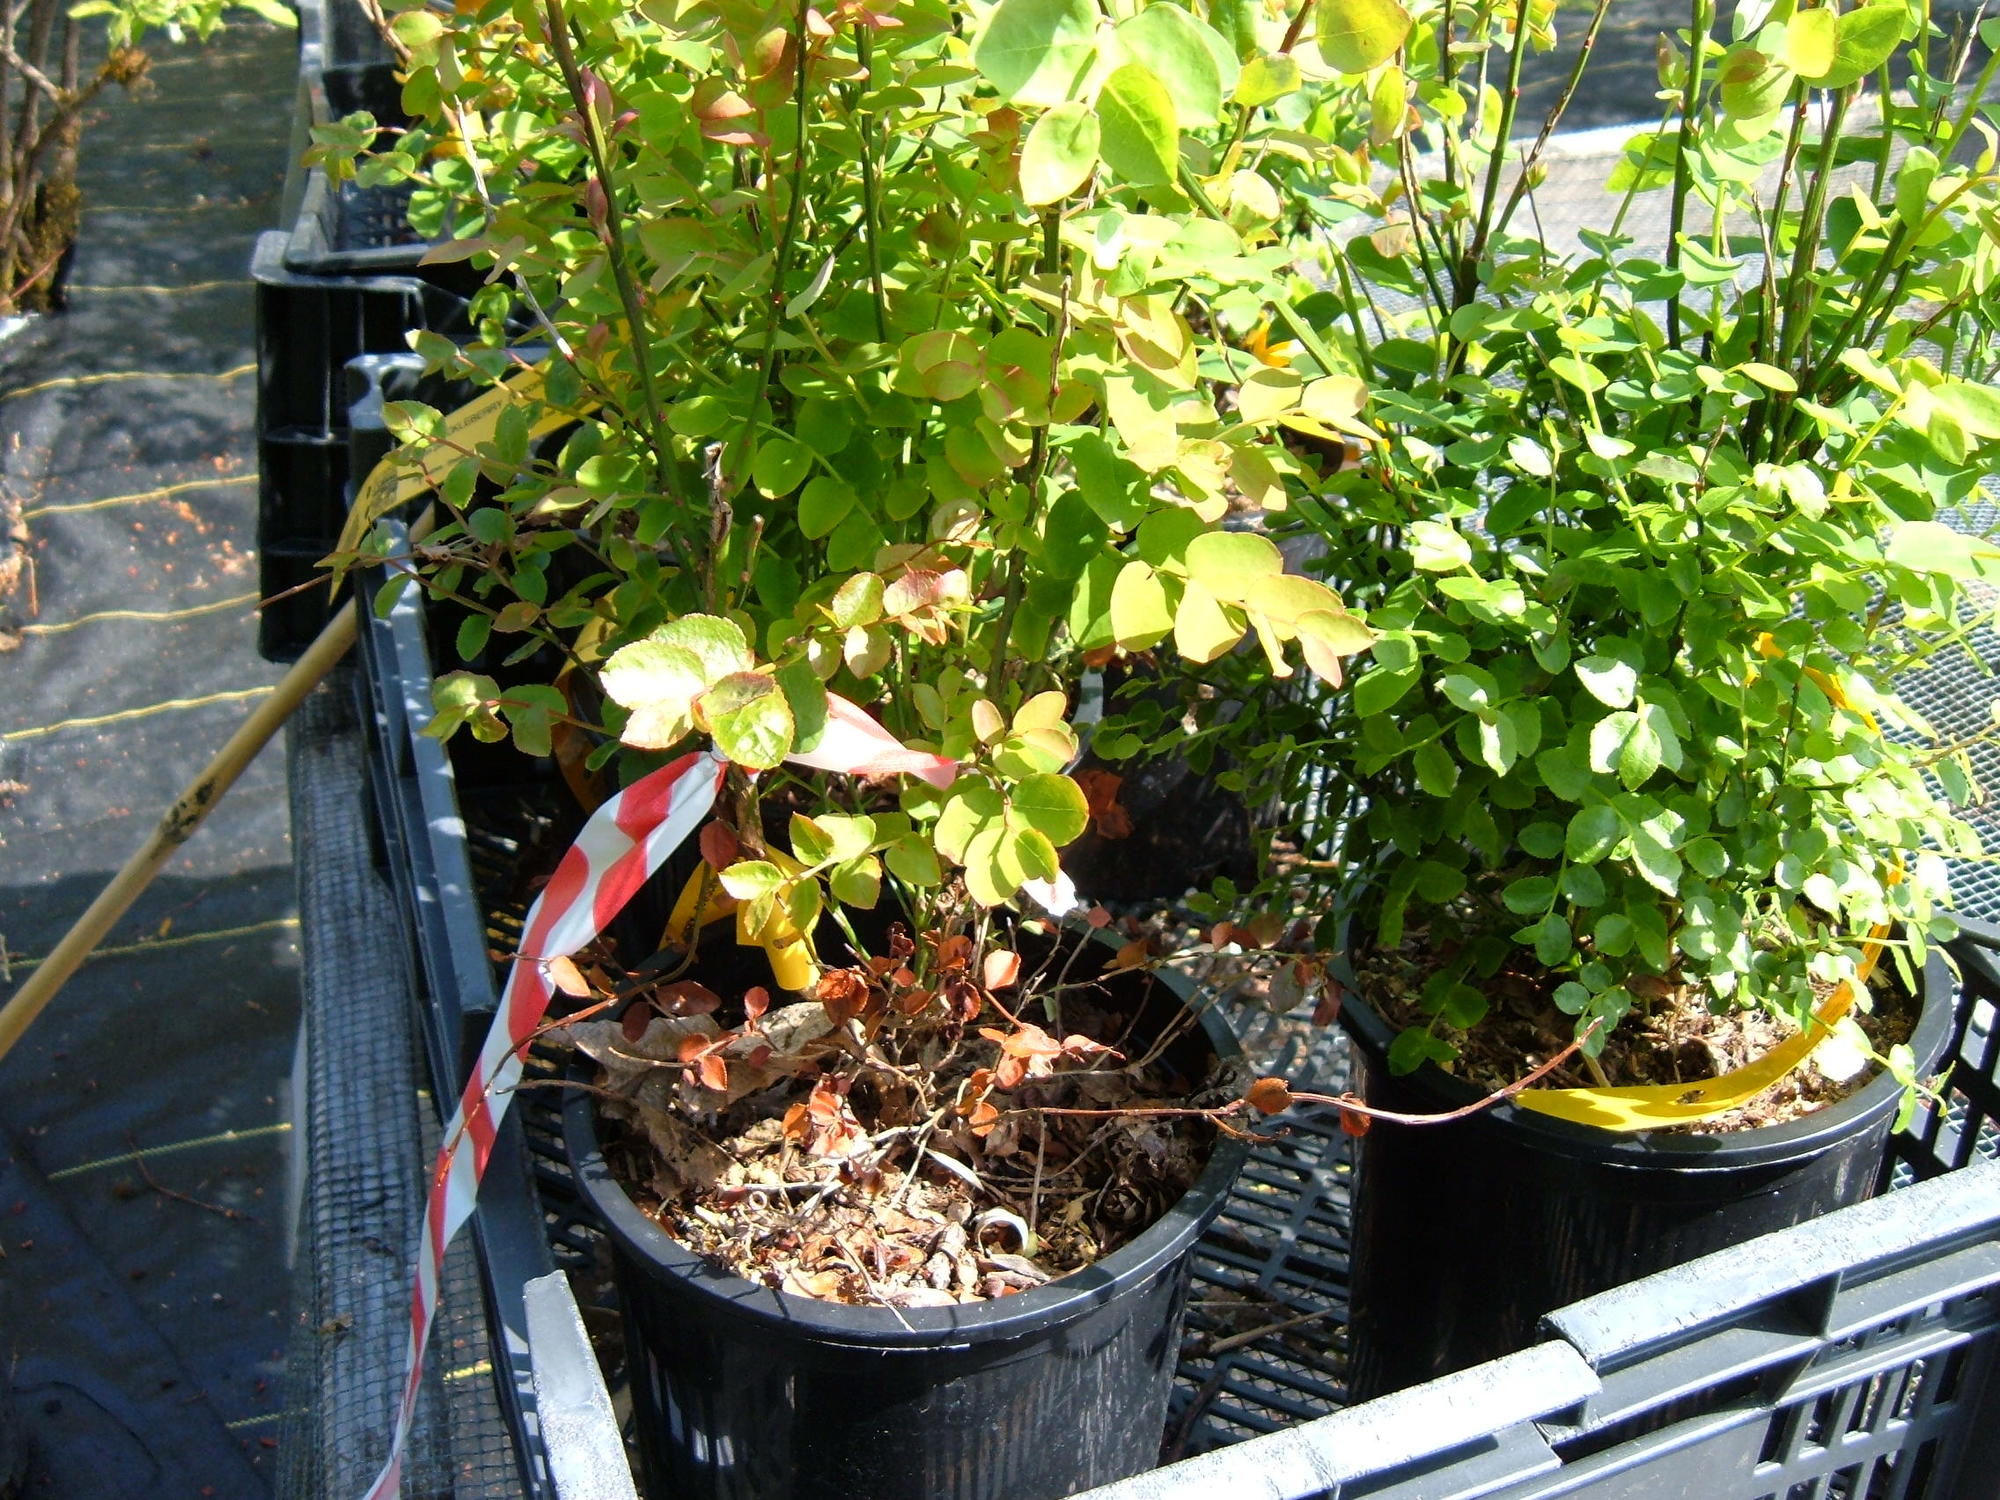 brown growth in plant at left, green at right